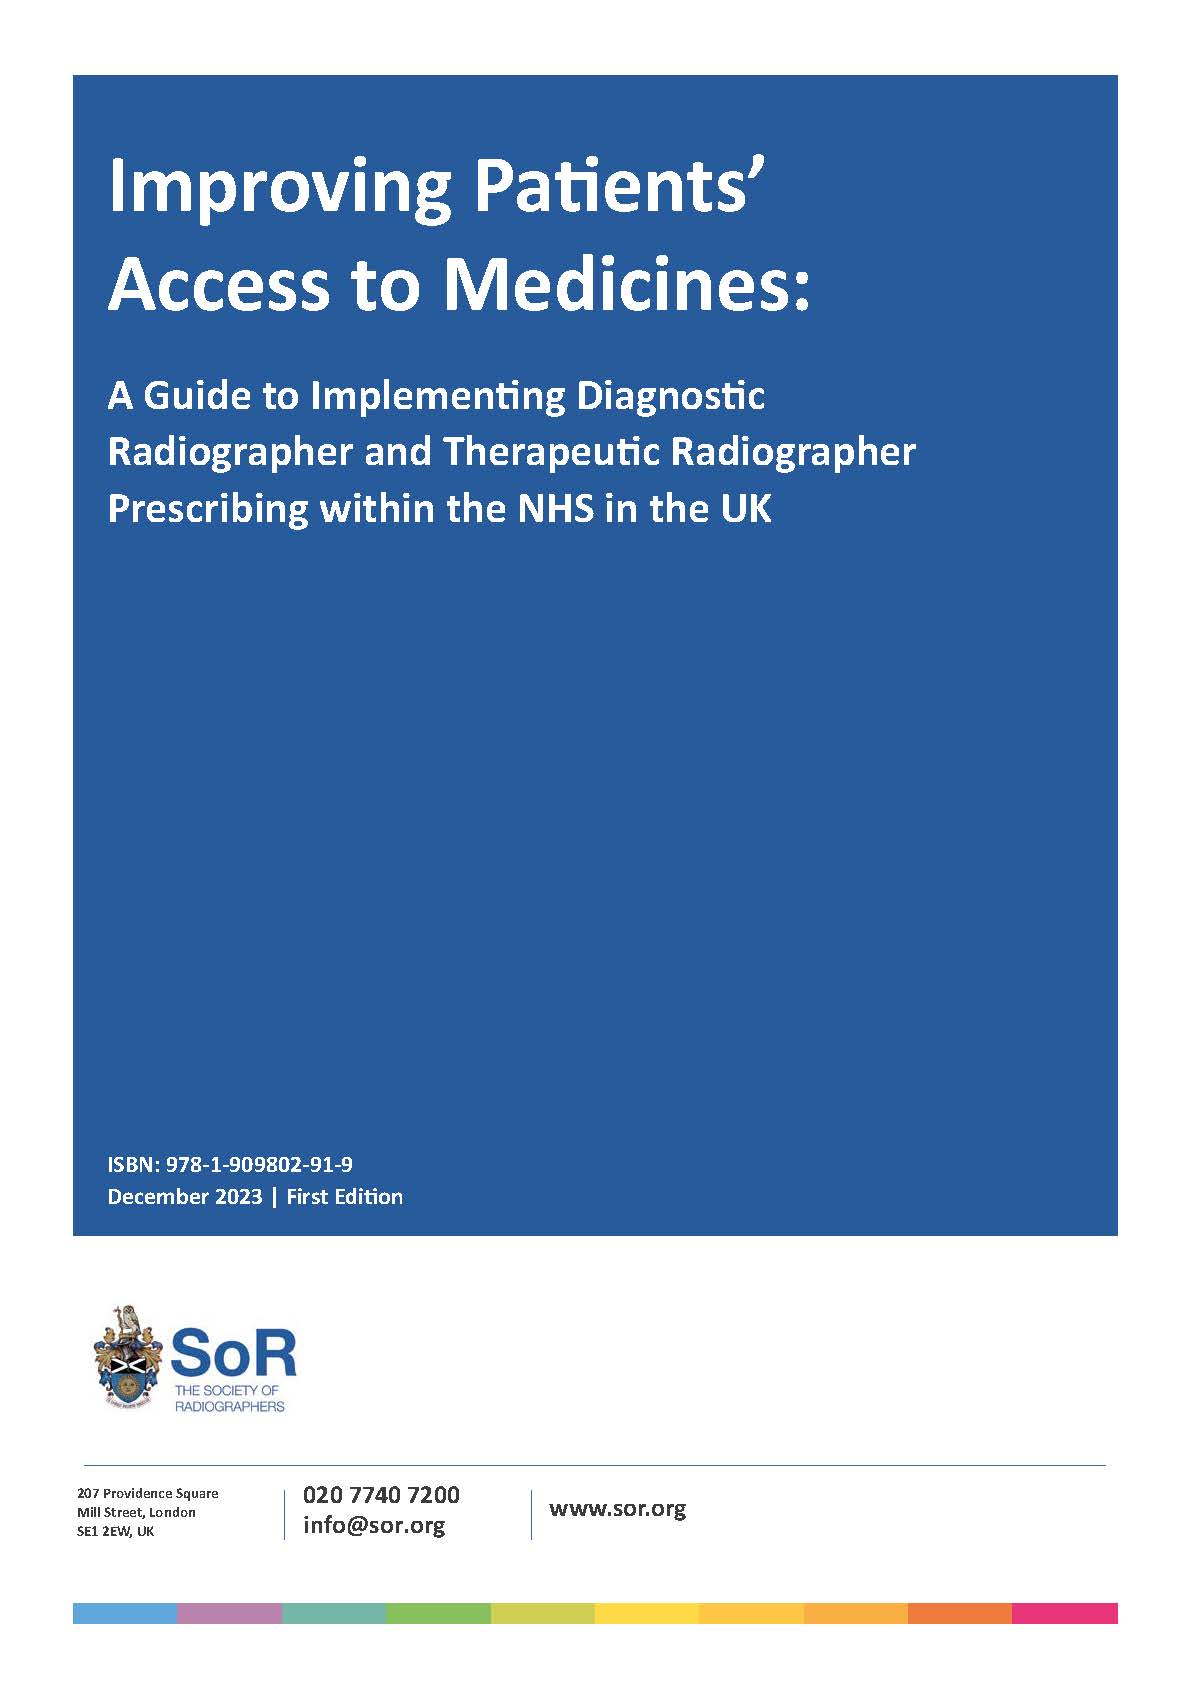 Improving Patients’ Access to Medicines: A Guide to Implementing Diagnostic Radiographer and Therapeutic Radiographer Prescribing within the NHS in the UK (Second Edition)